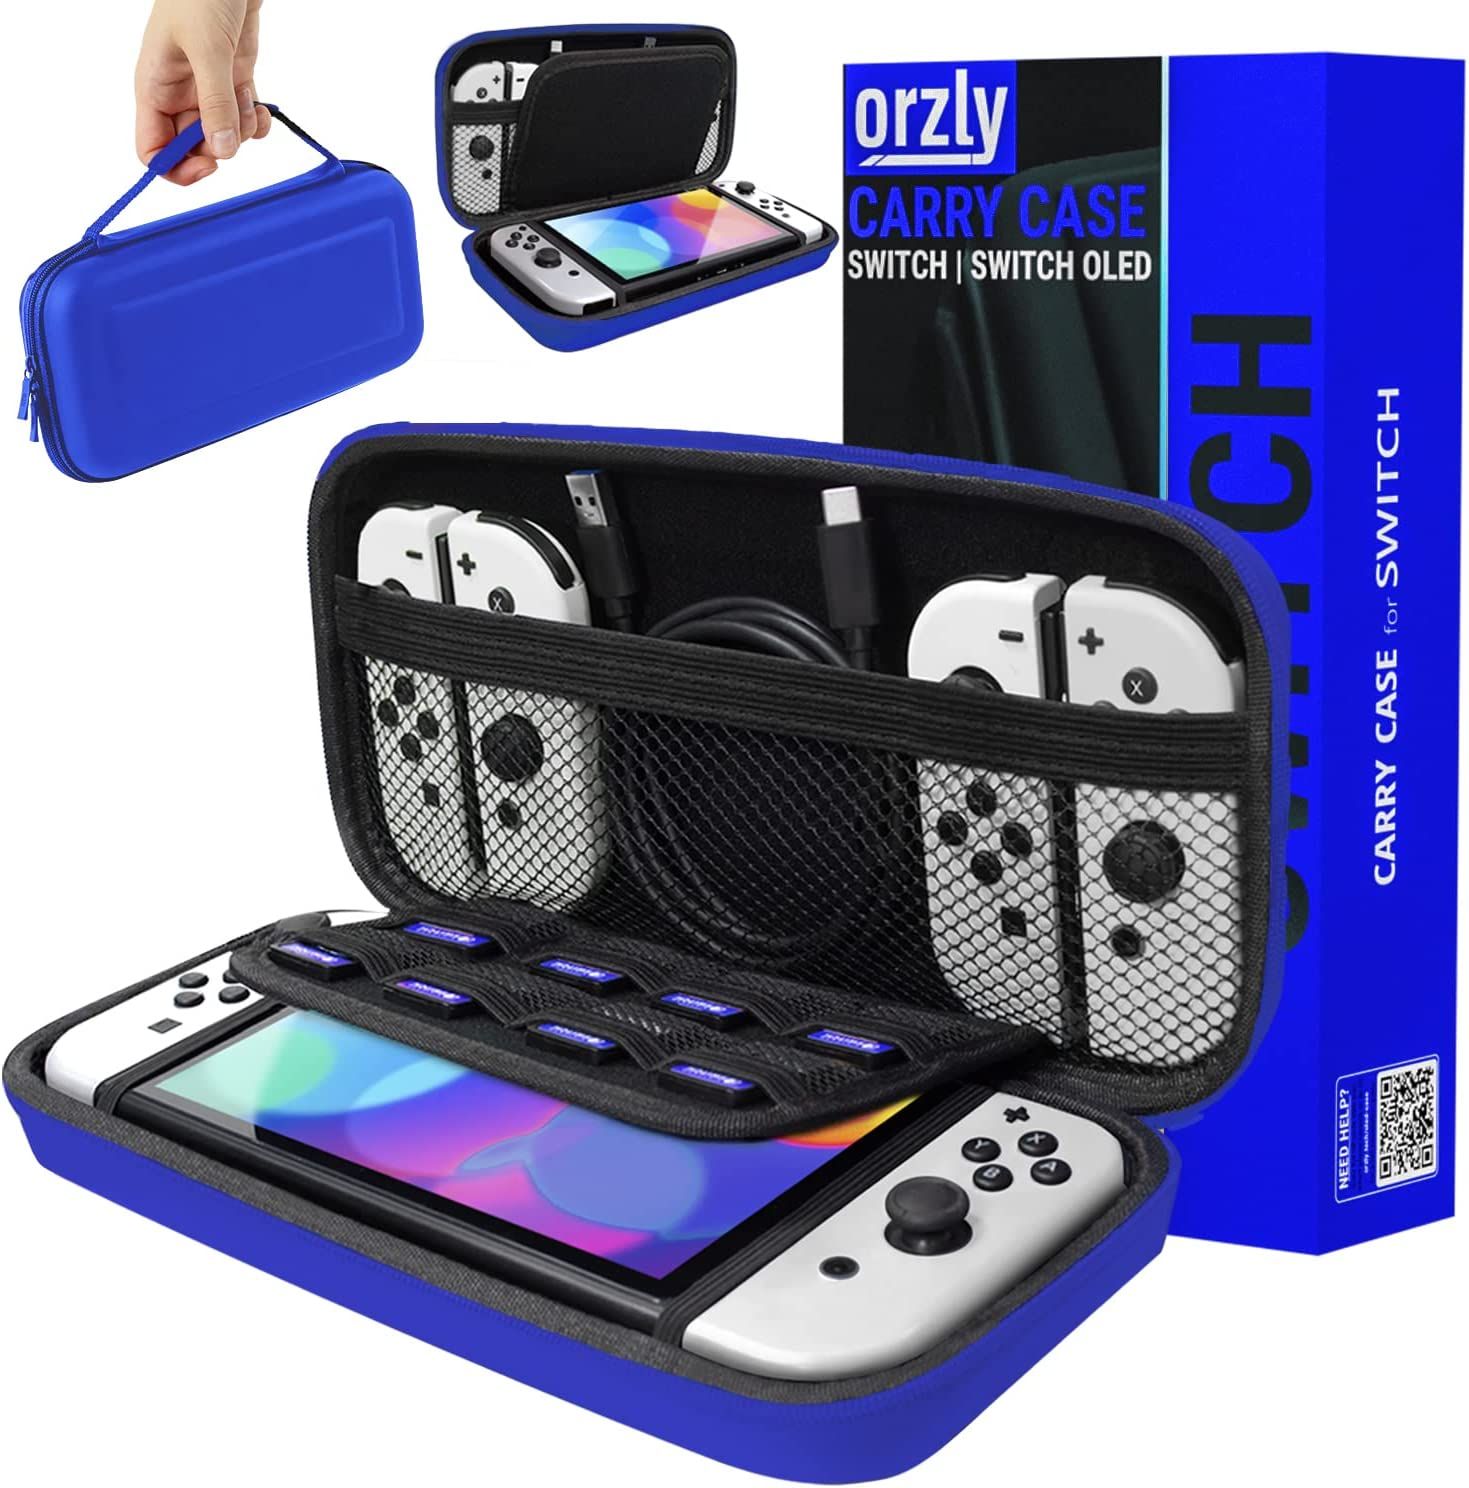 Orzly Carrying Case